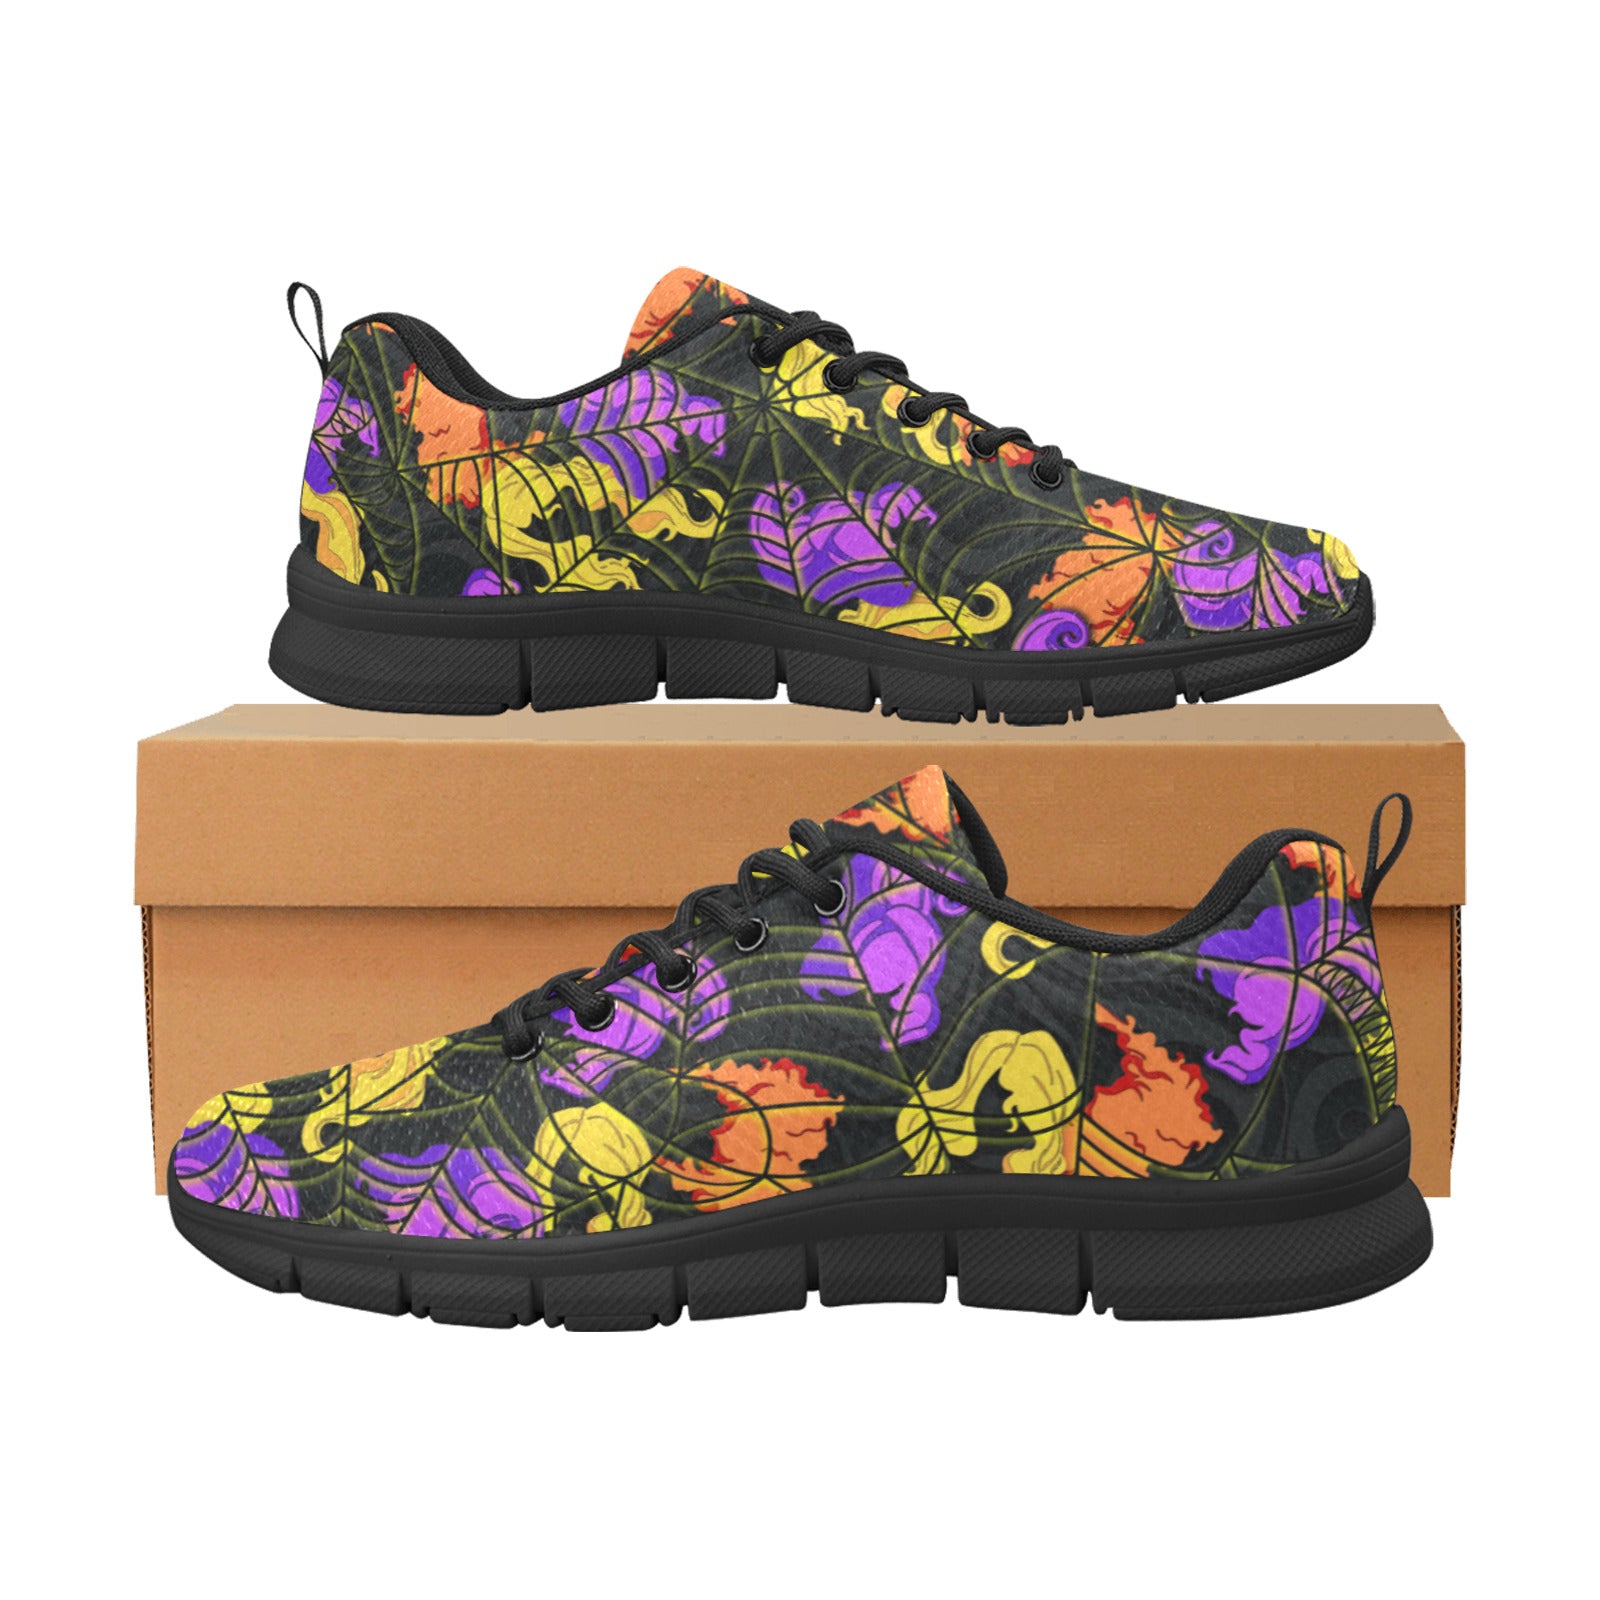 Hocus Pocus Halloween Shoes - Wigs and Spider Webs Women's Breathable Sneakers